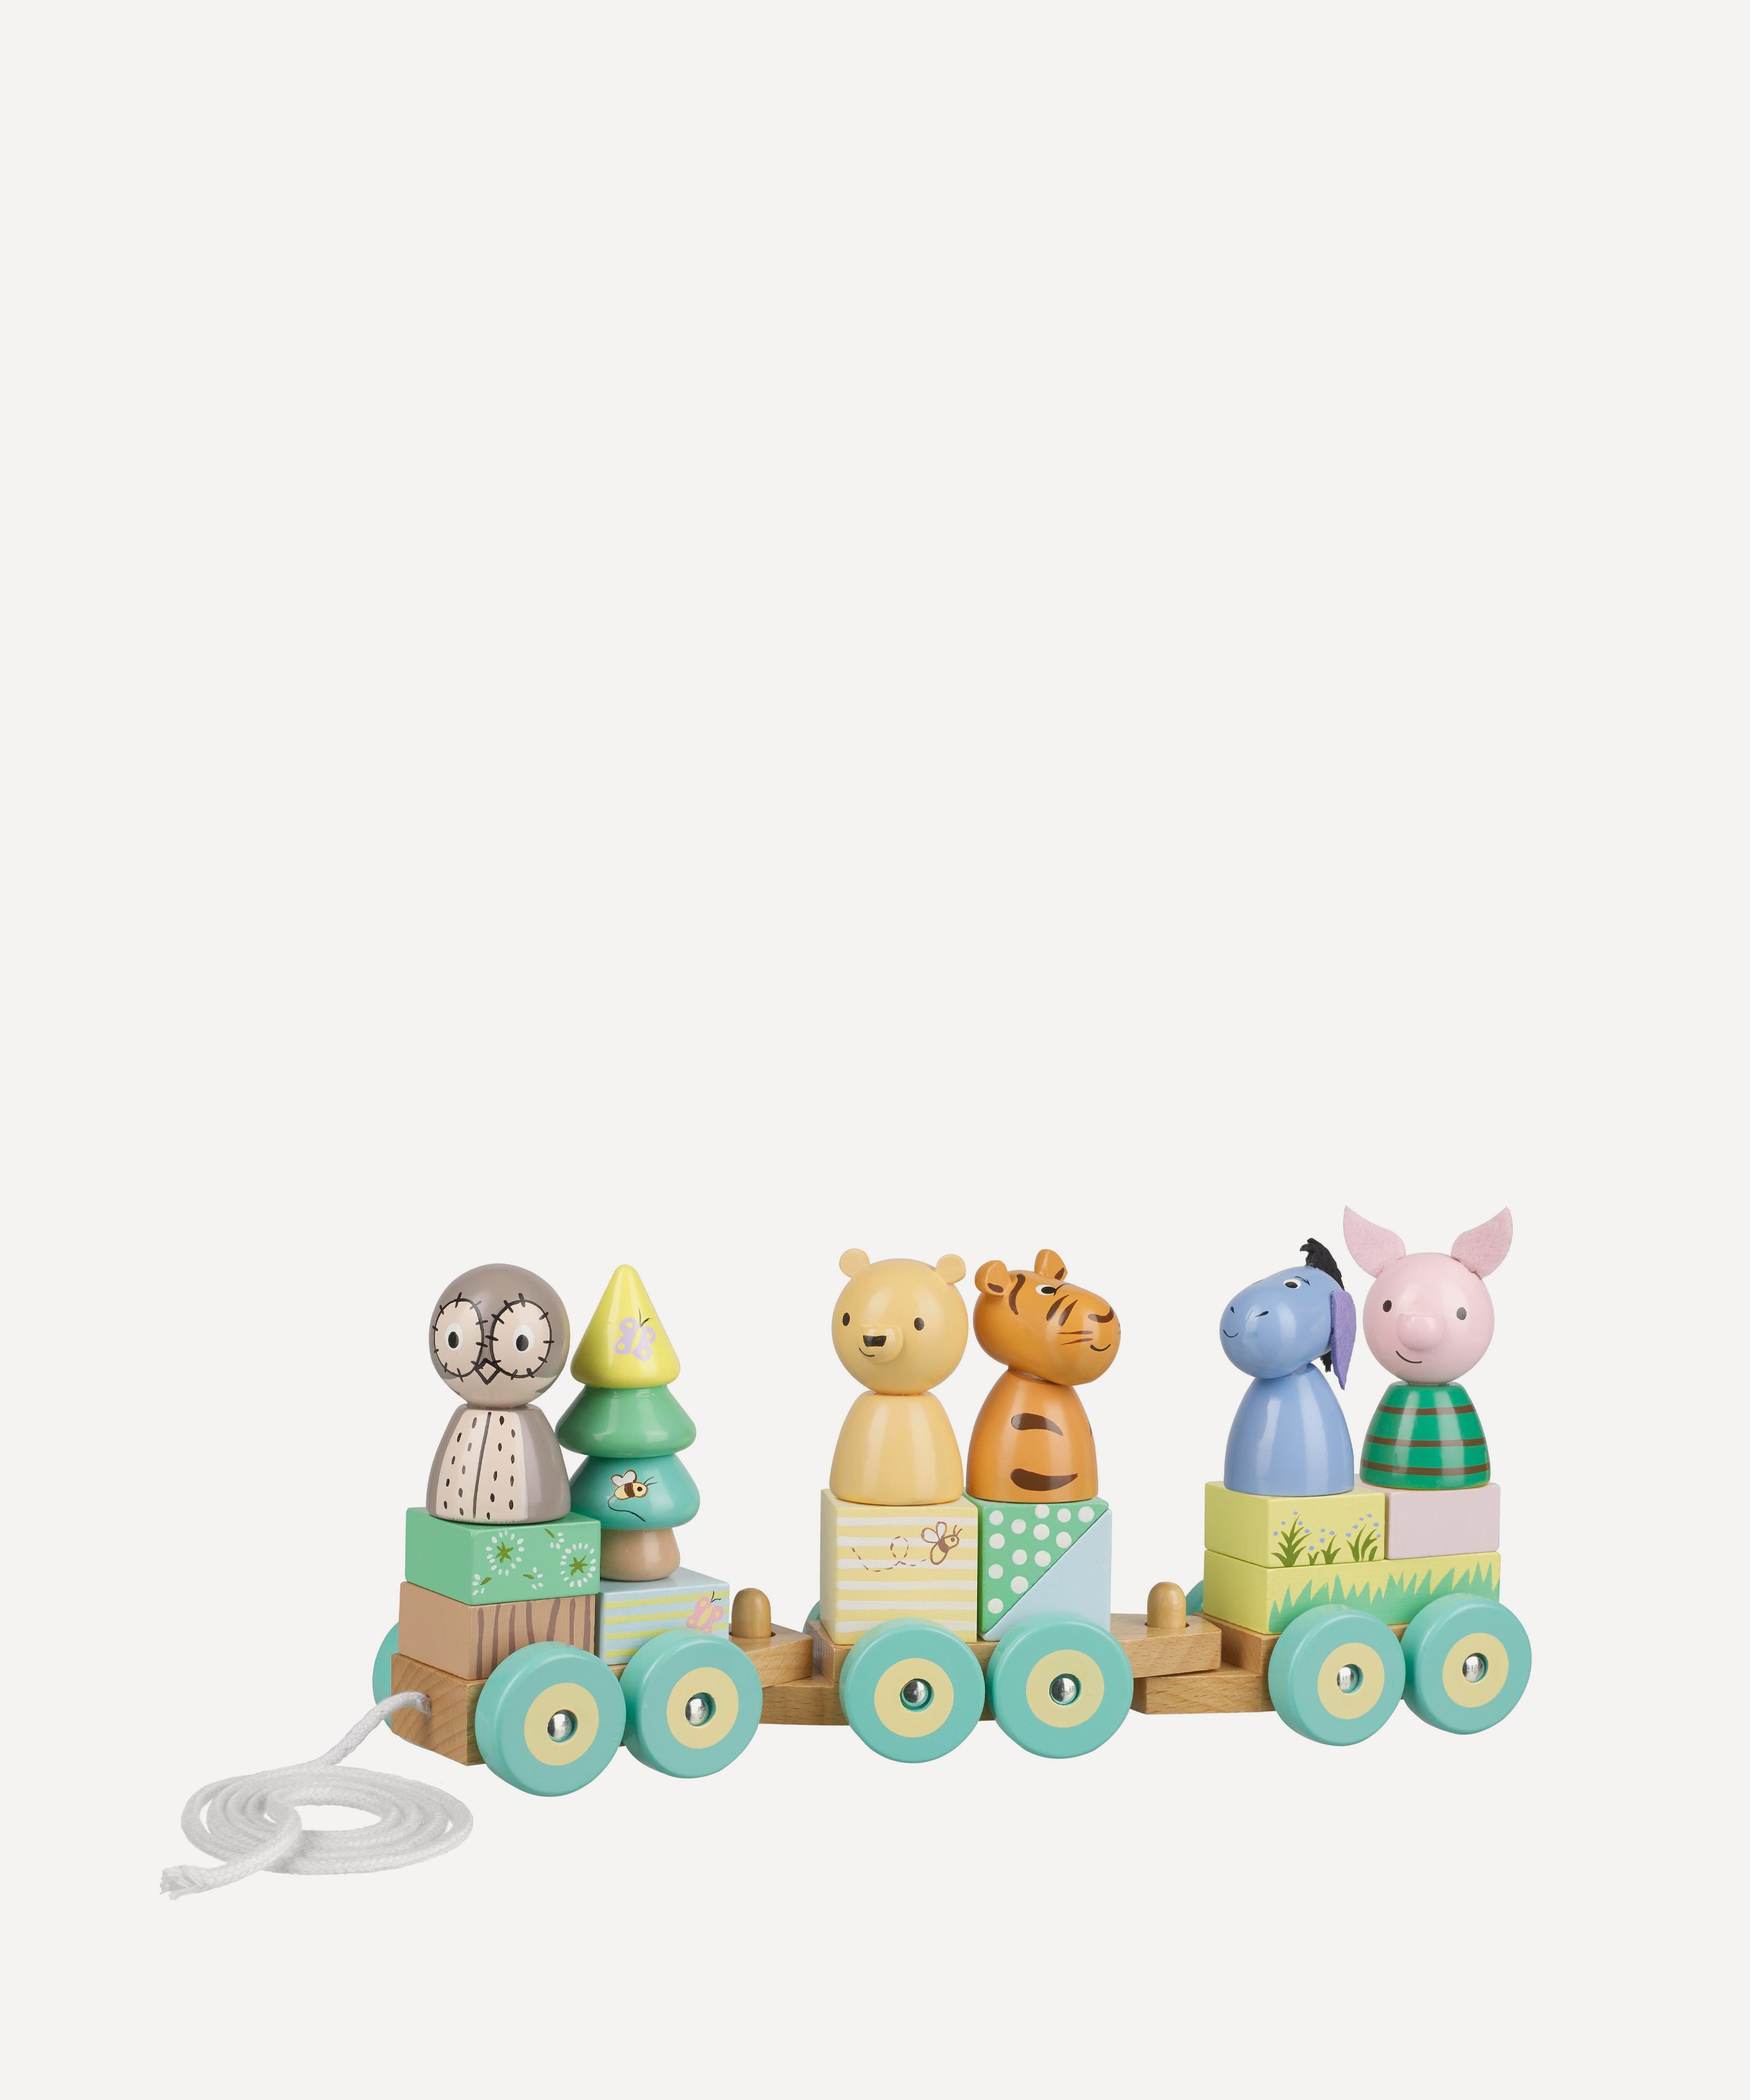 Peter Rabbit Puzzle Train-NP by Orange Tree Toys